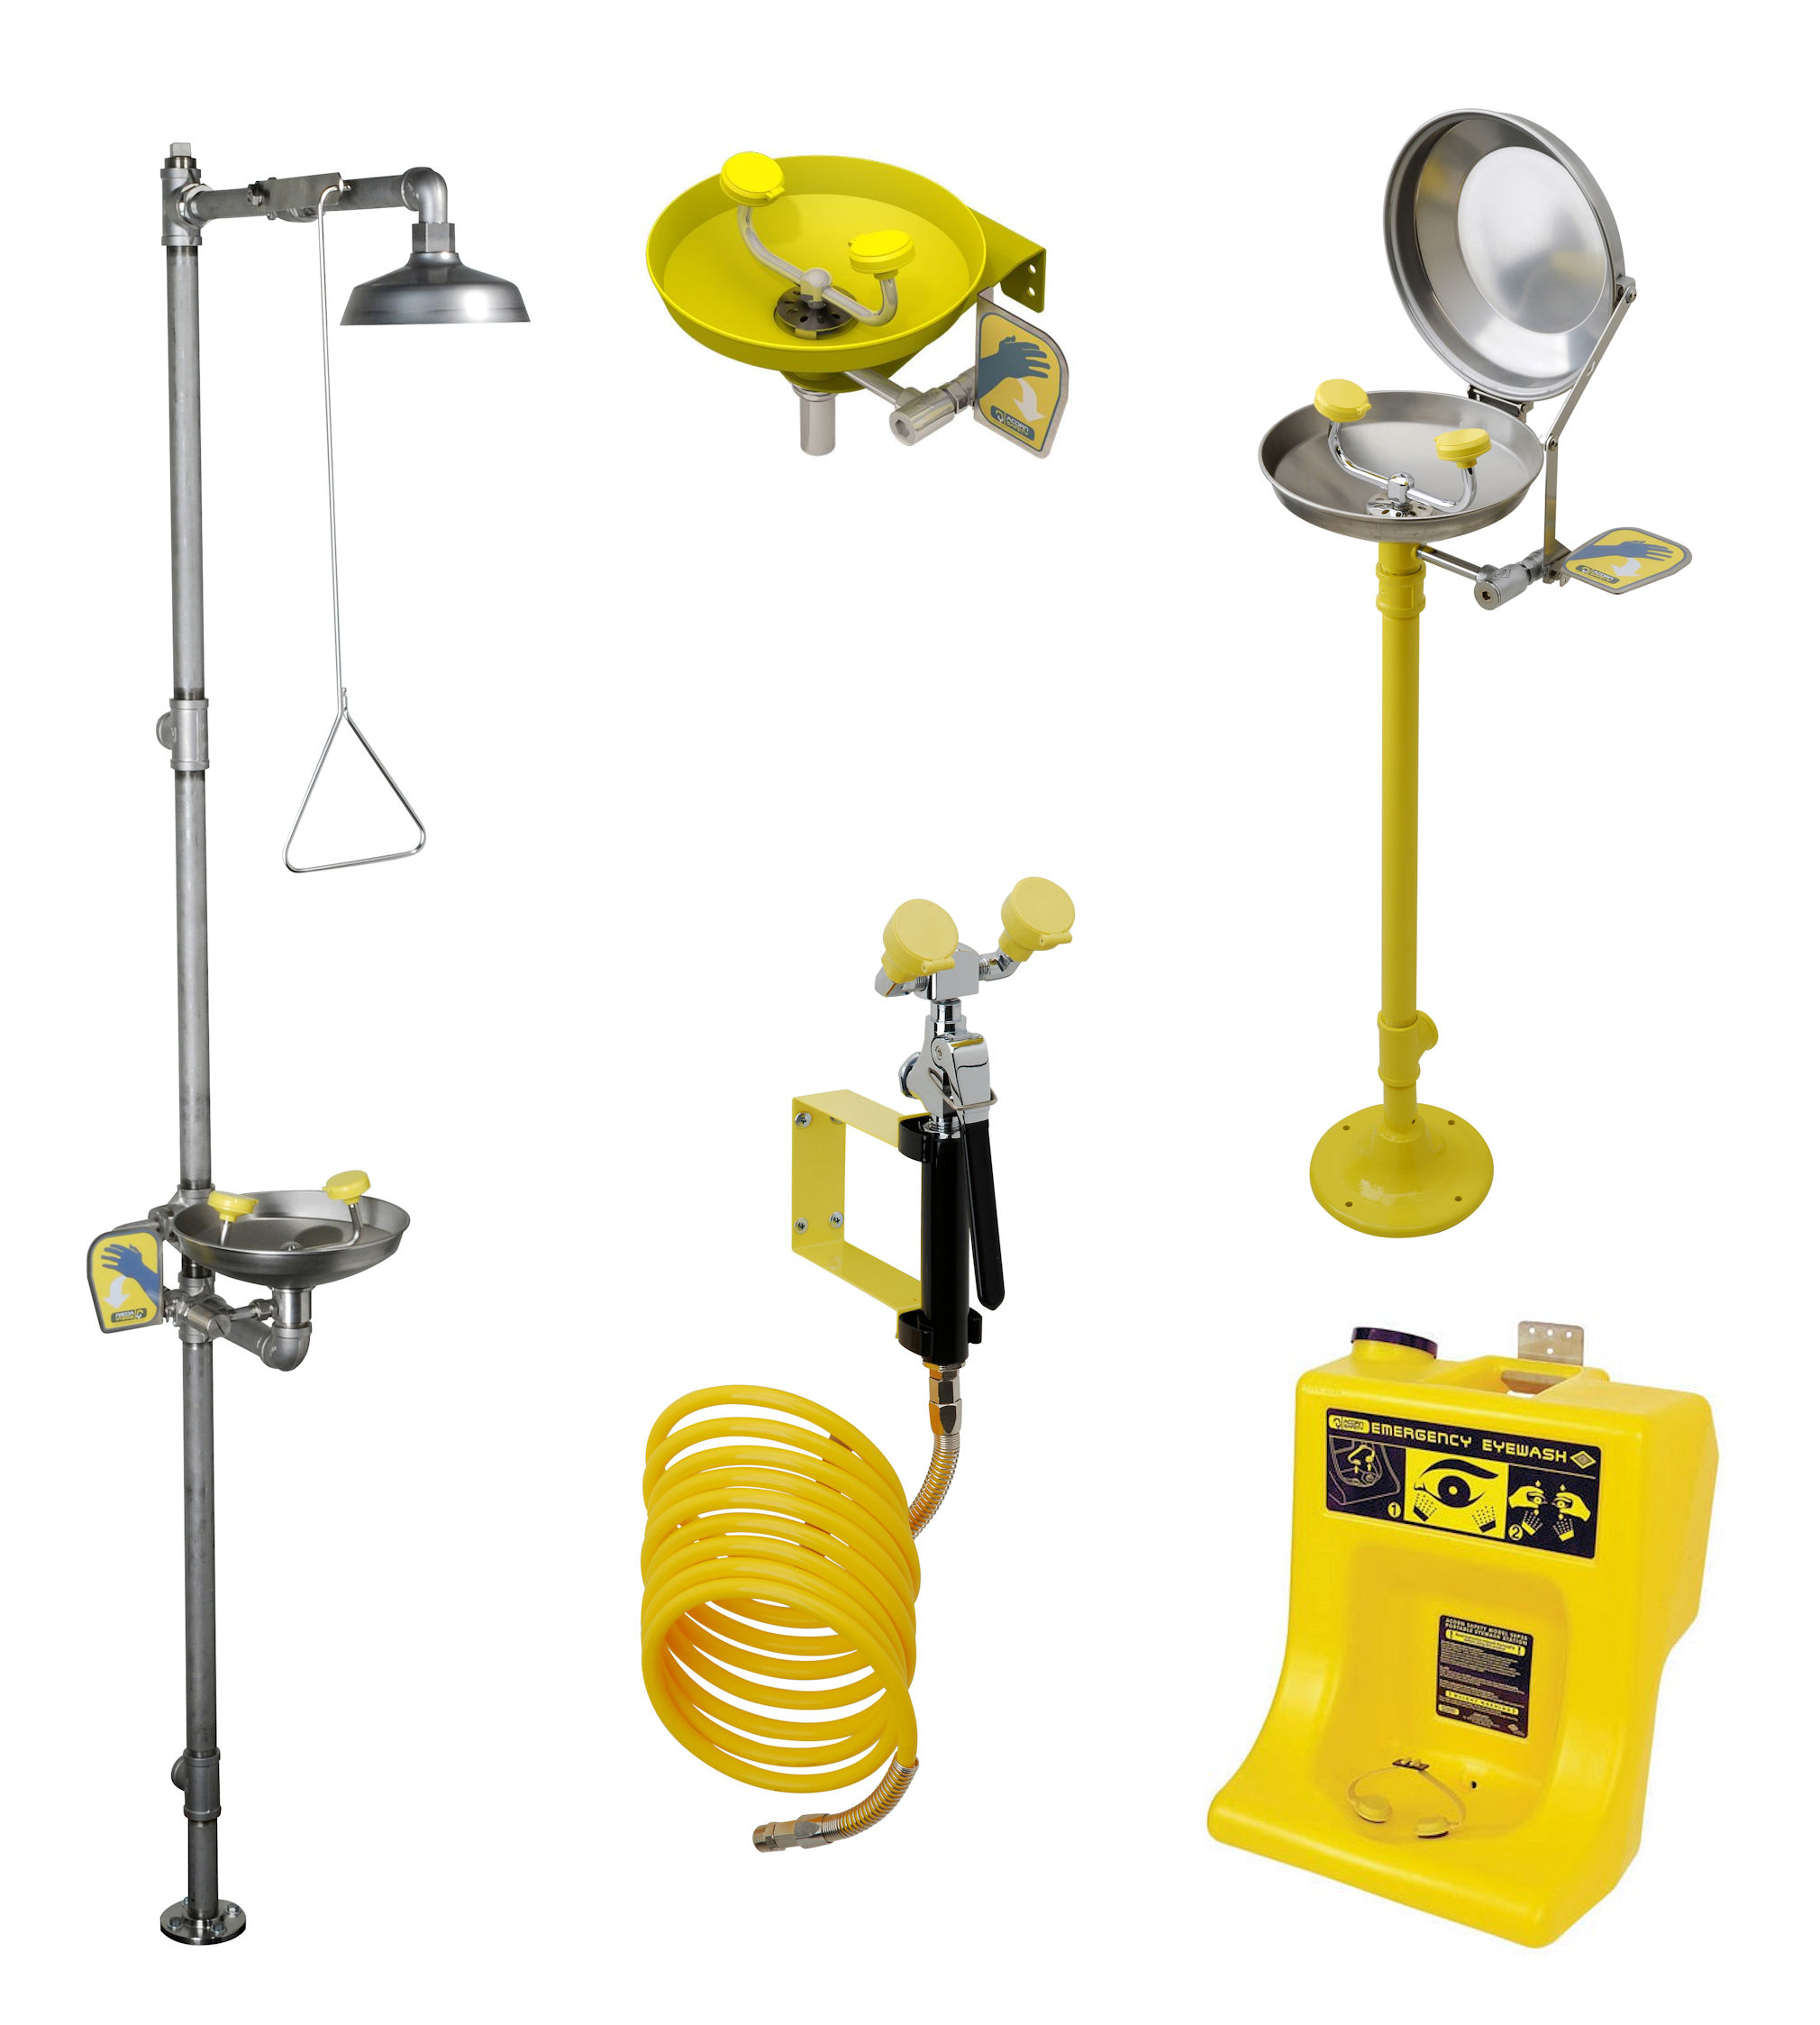 All Safety Products image